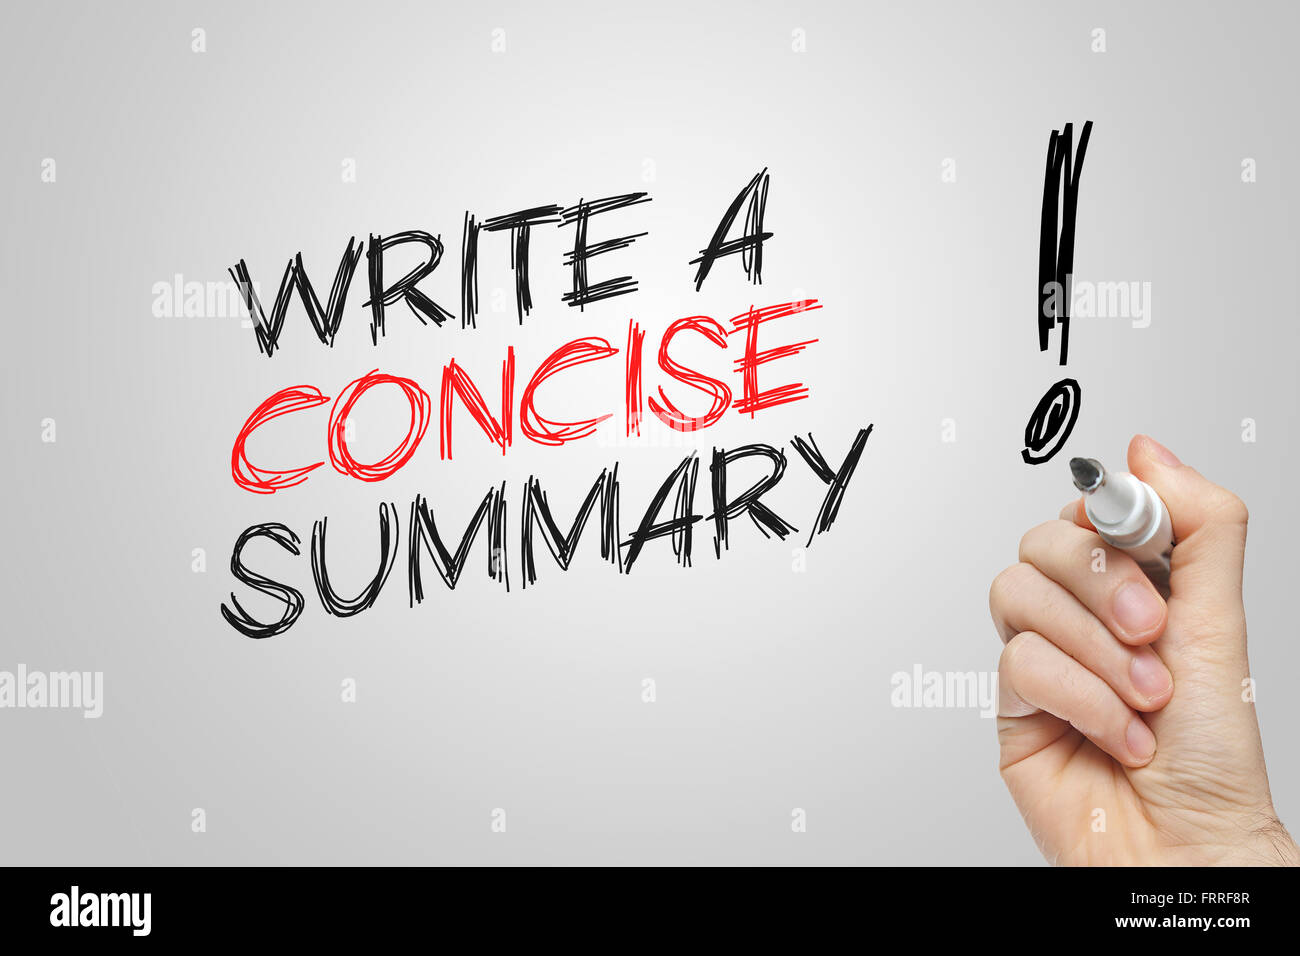 Hand writing write a concise summary on grey background Stock Photo